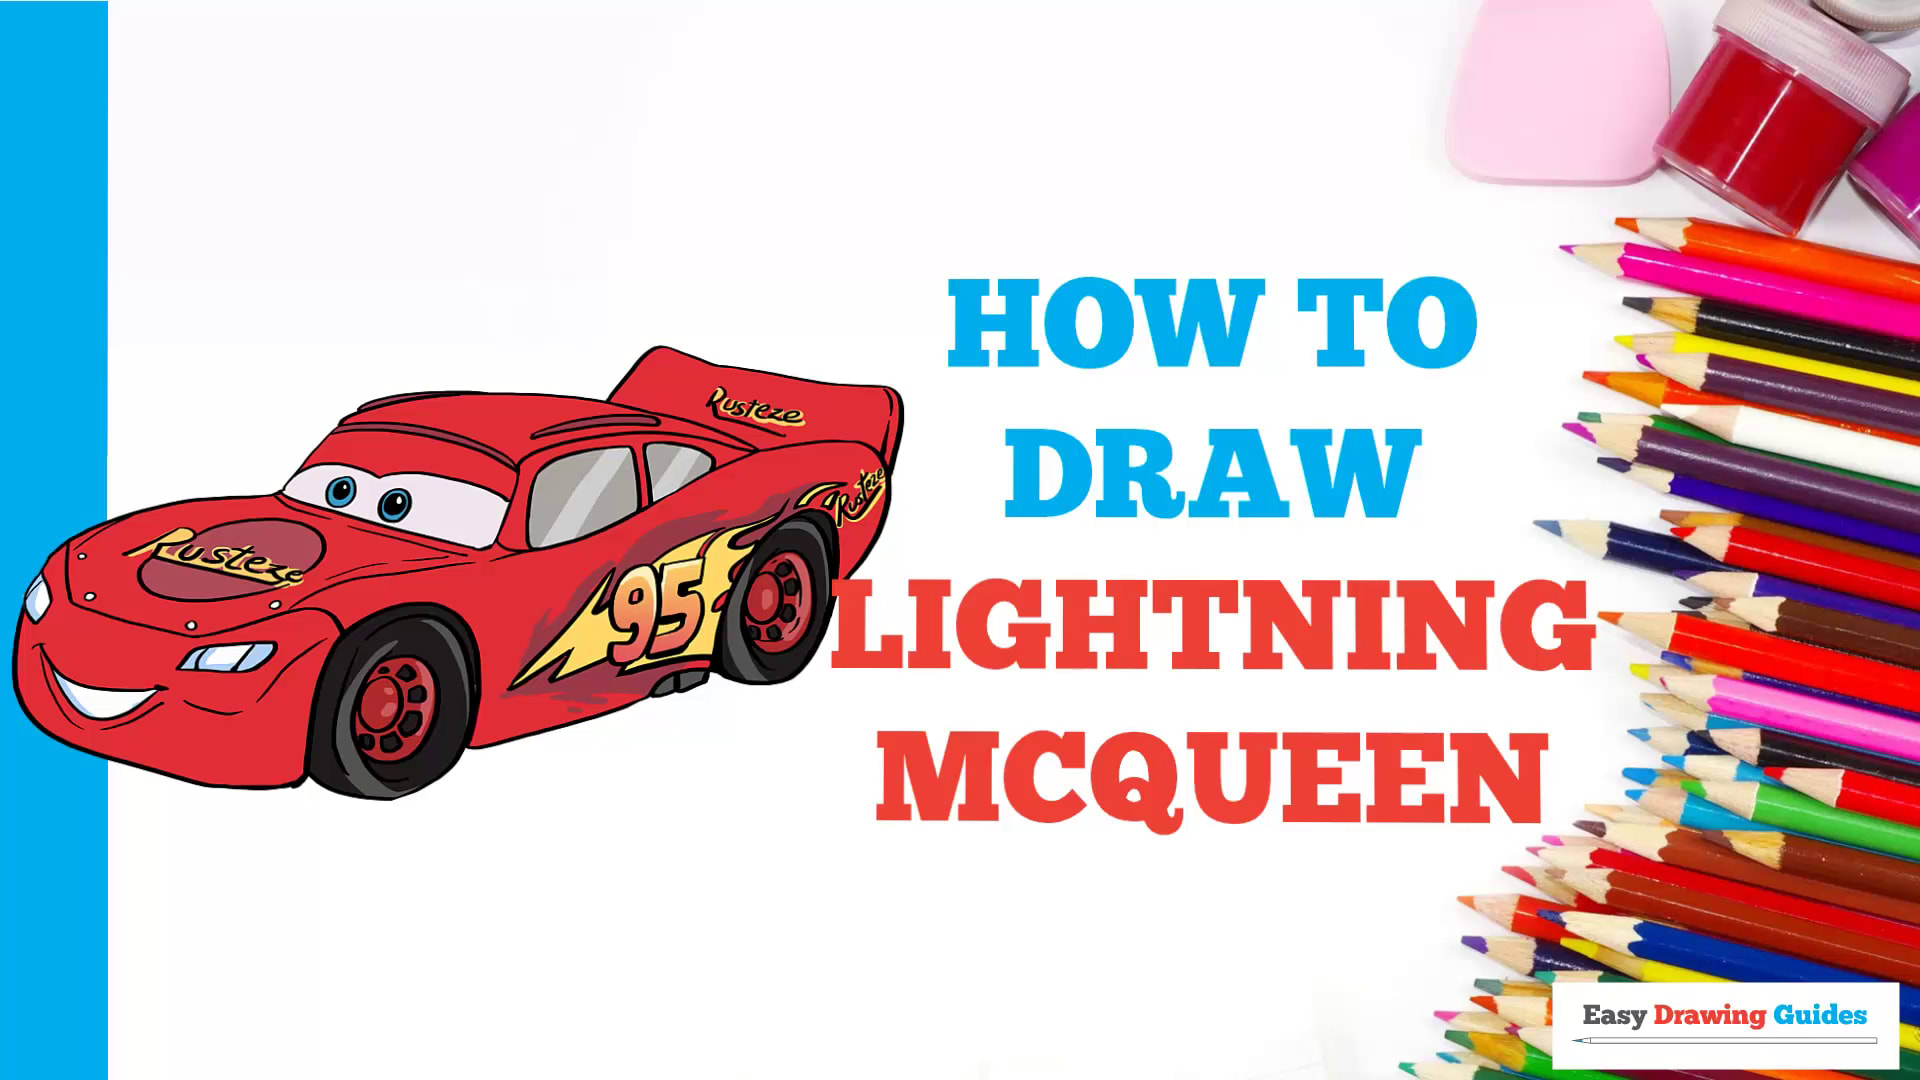 How to Draw Lightning McQueen - Really Easy Drawing Tutorial